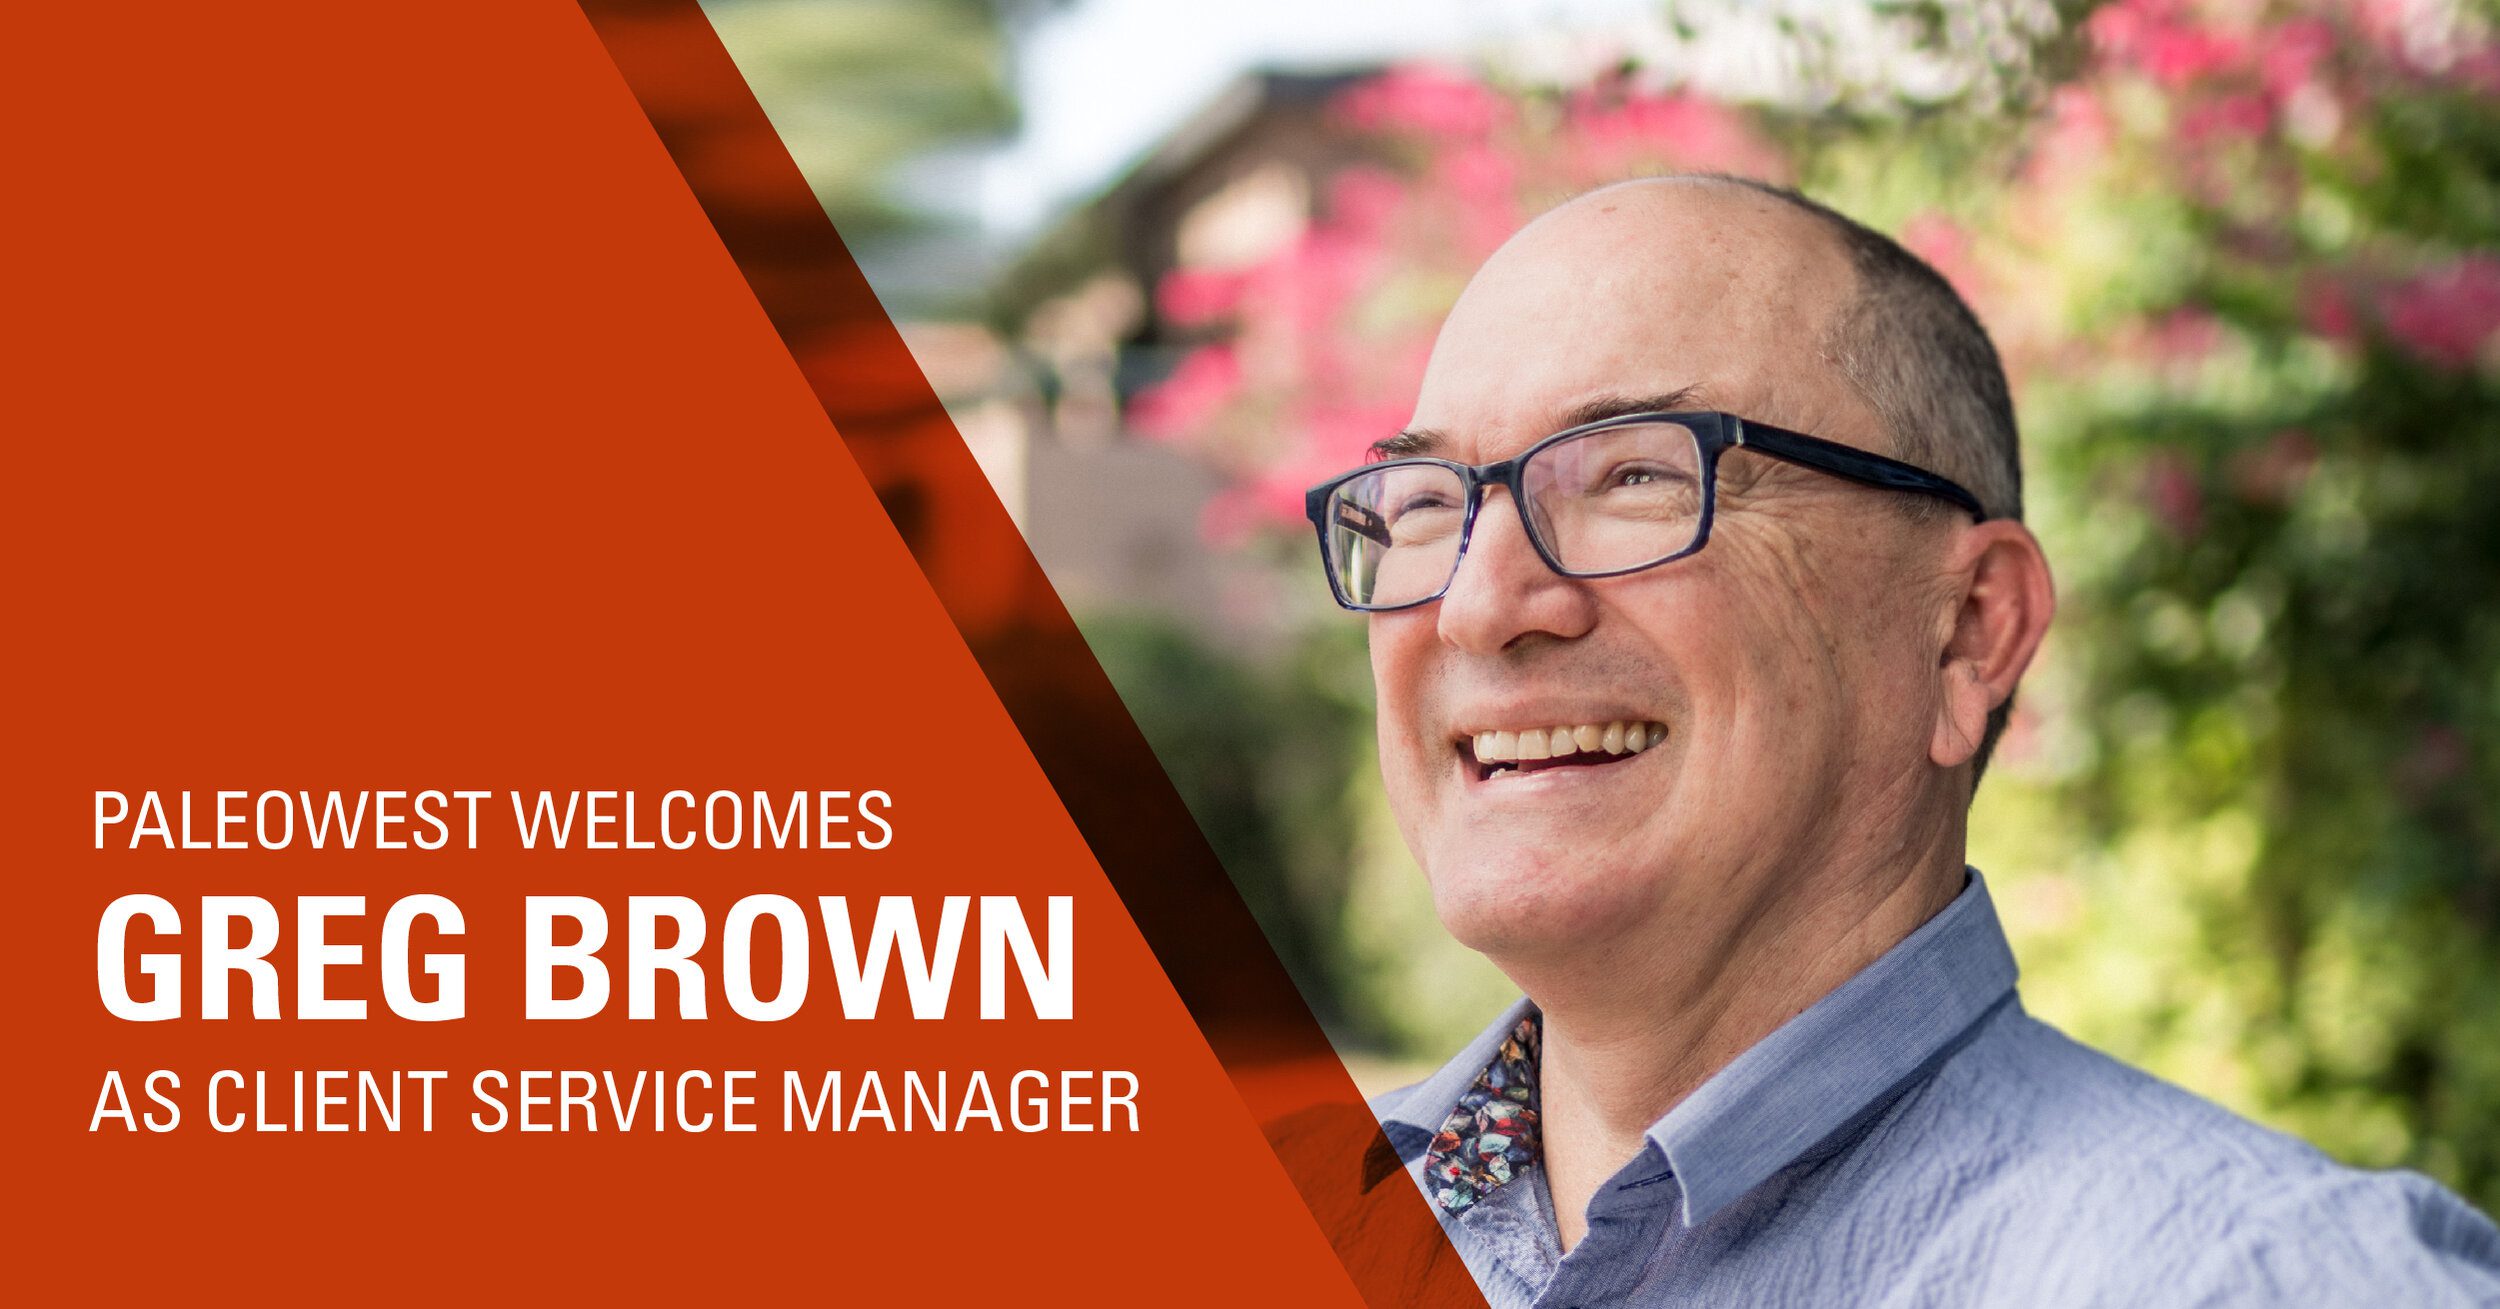 Paleowest welcomes Greg Brown as Client Service Manager